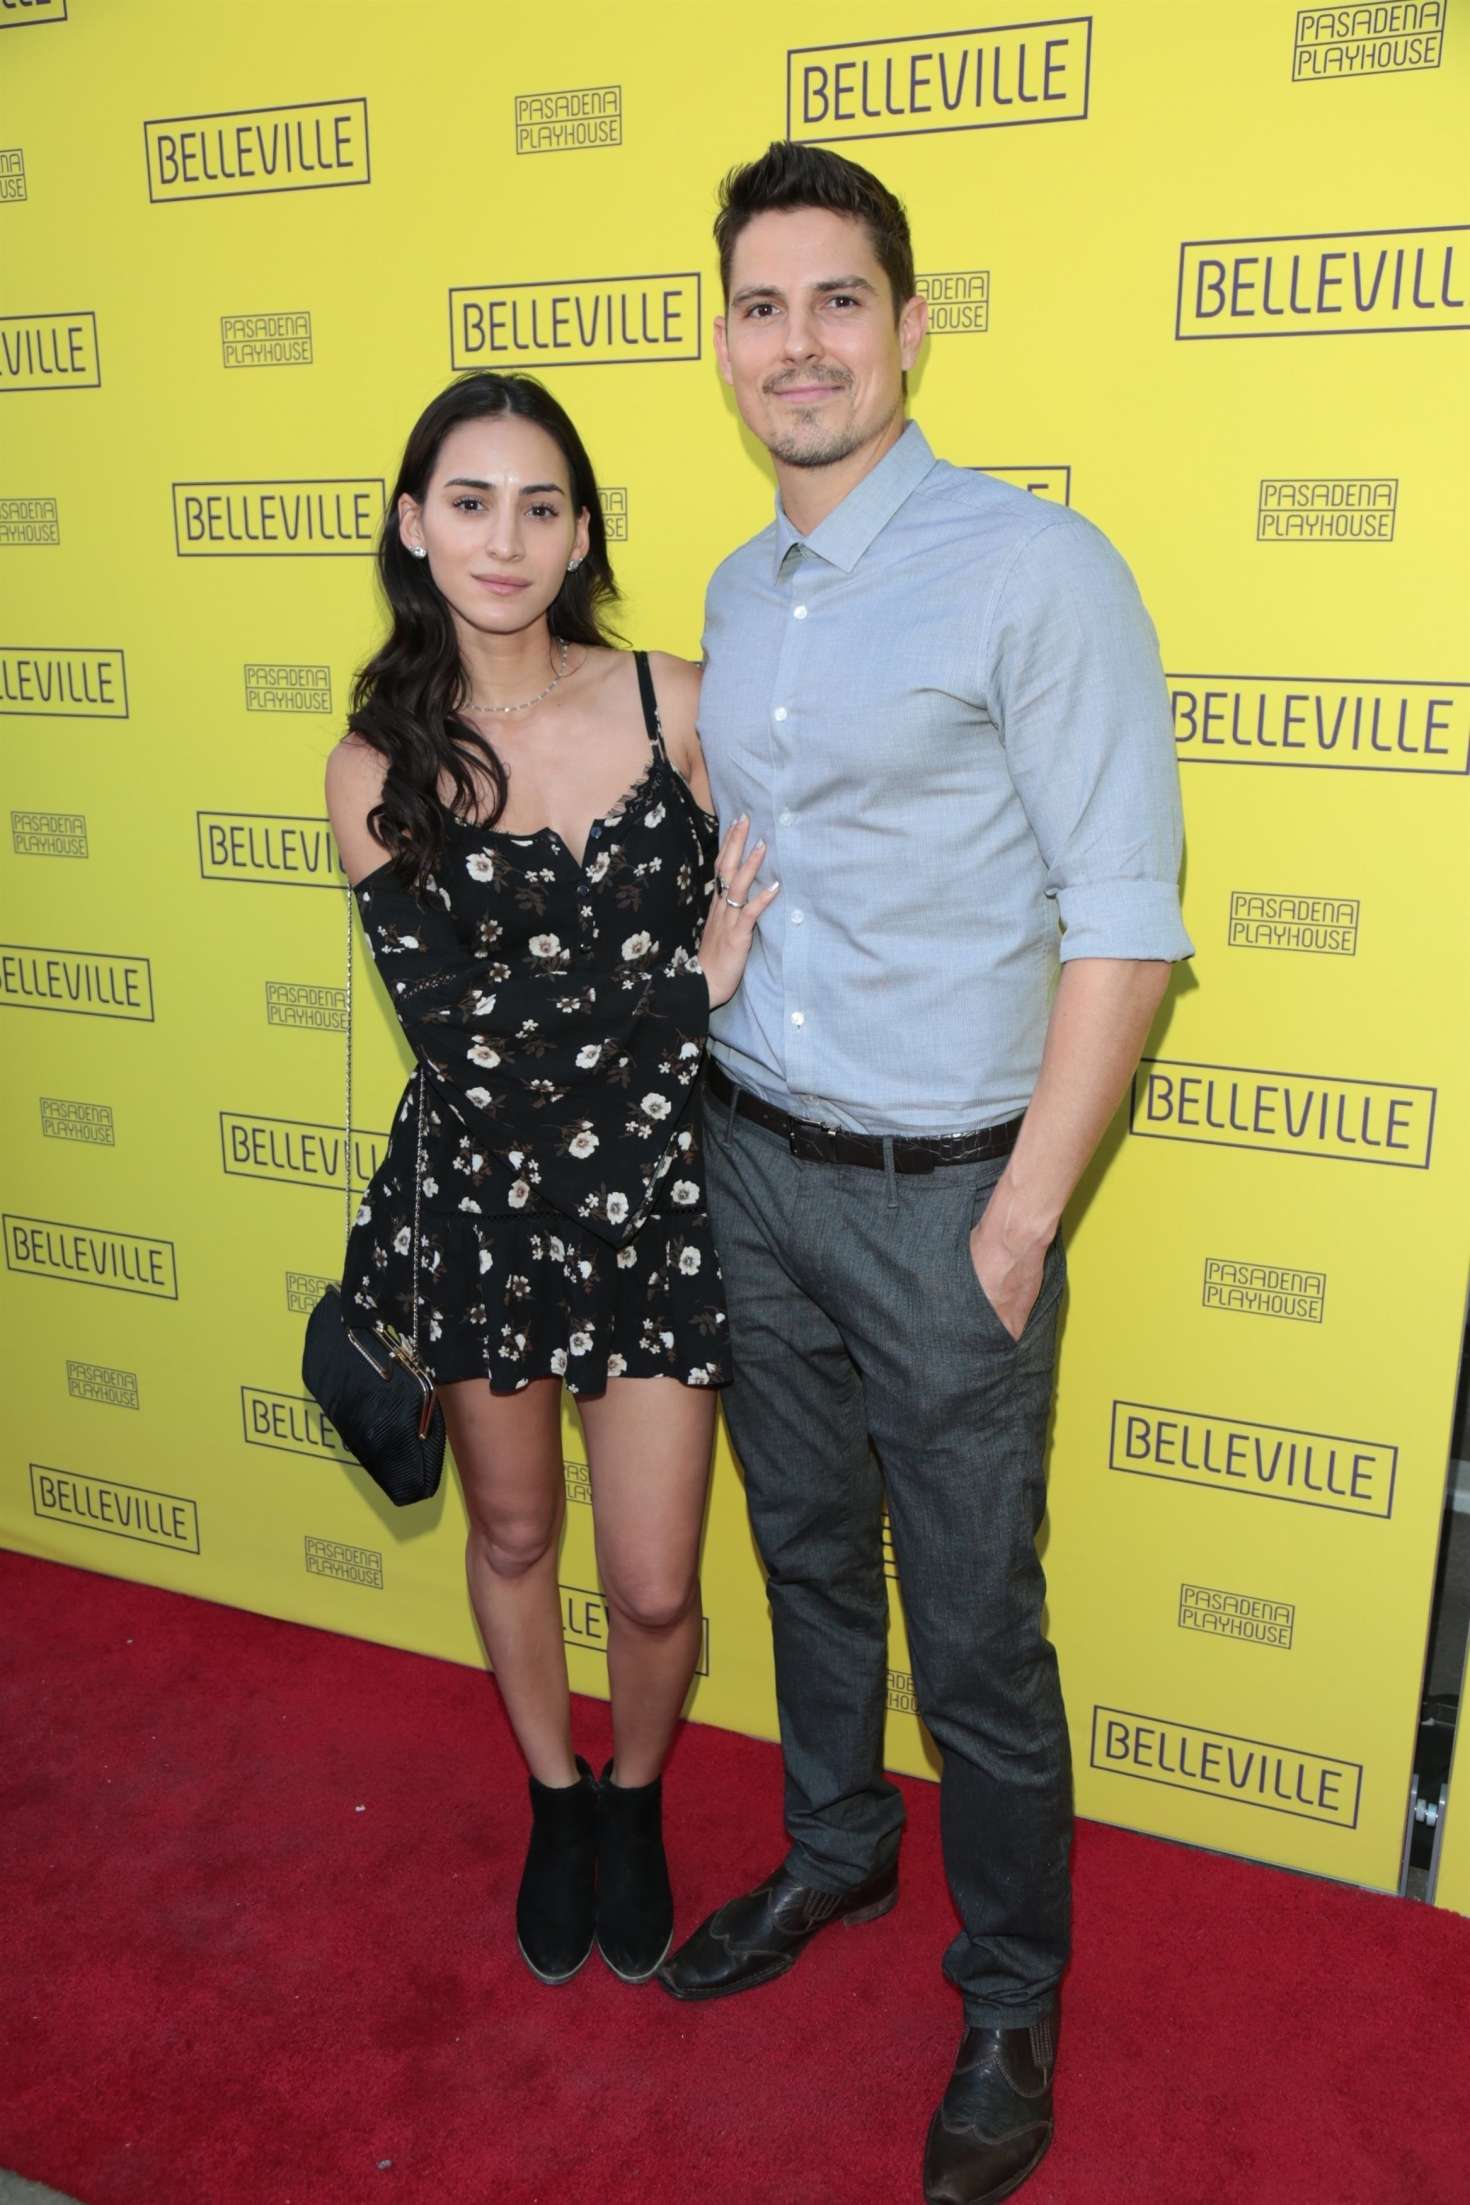 Cherie Daly â€“ Opening Night Of Belleville in Pasadena